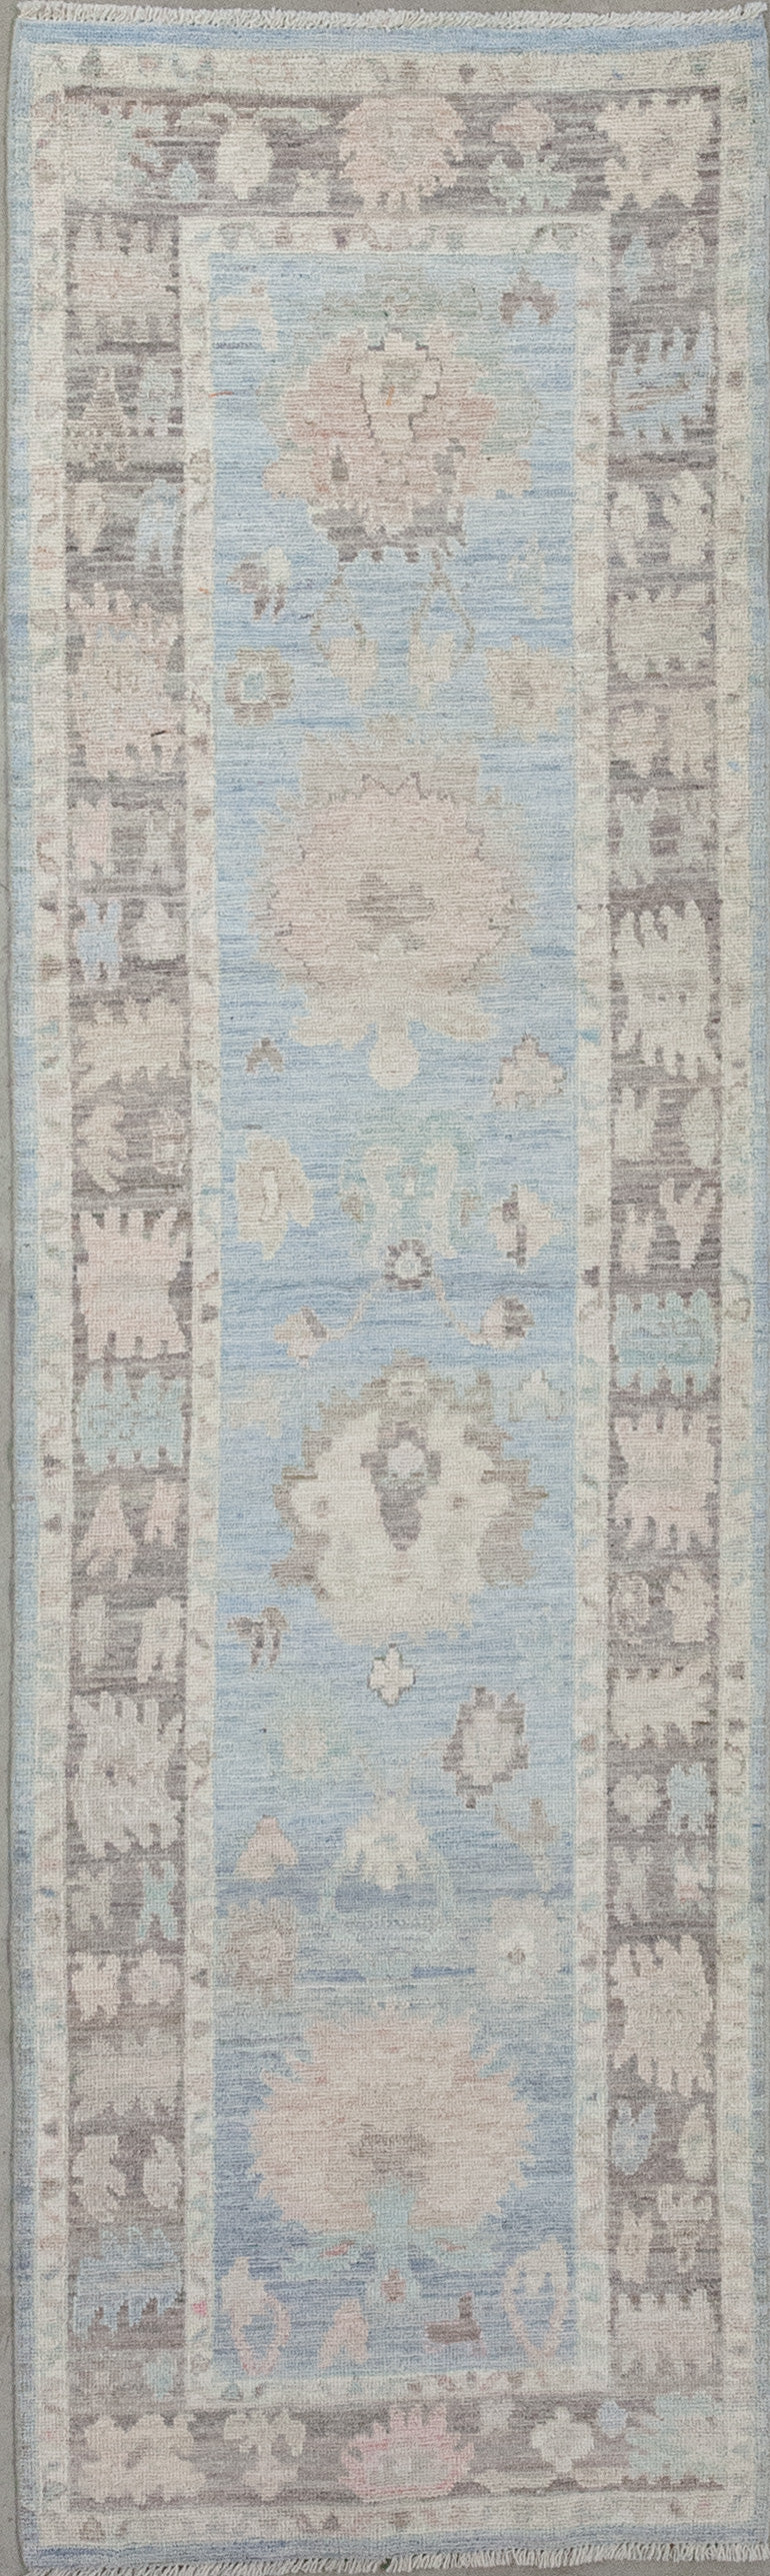 Hallway rug was woven with a cloudy tone for the background and an elegant brown frame. 